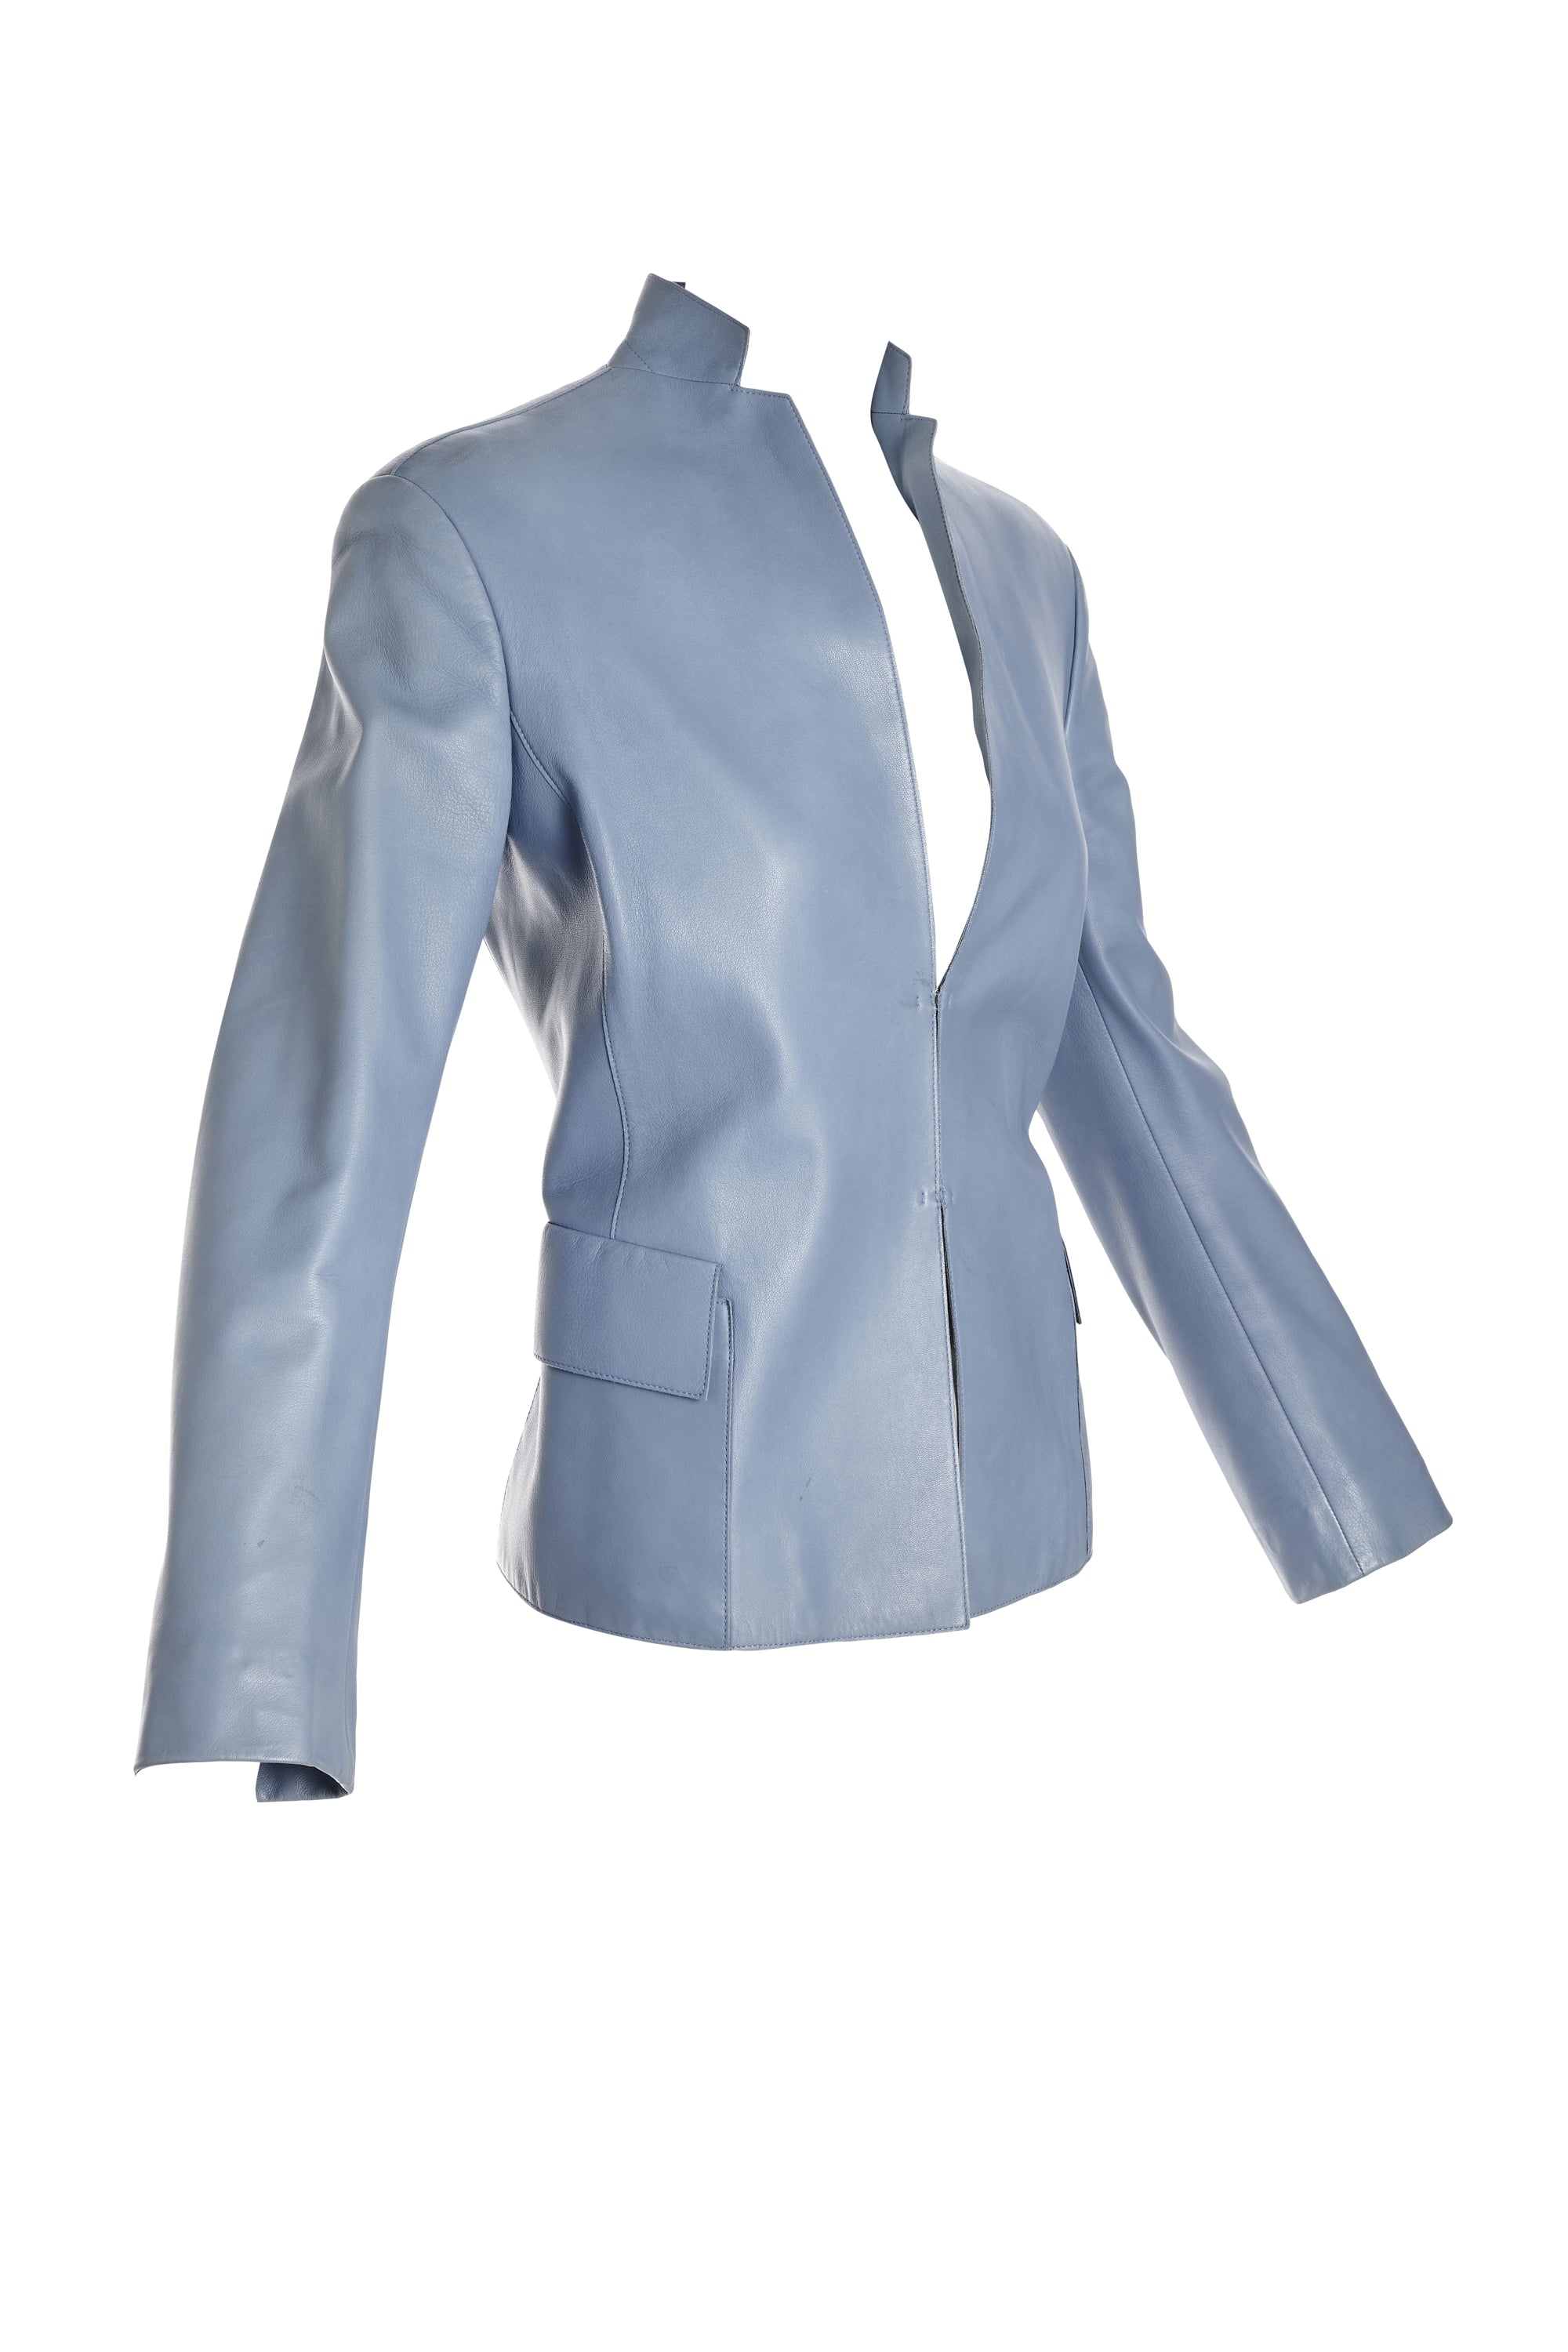 Akris Blue Leather Hook Front Jacket - Foxy Couture Carmel